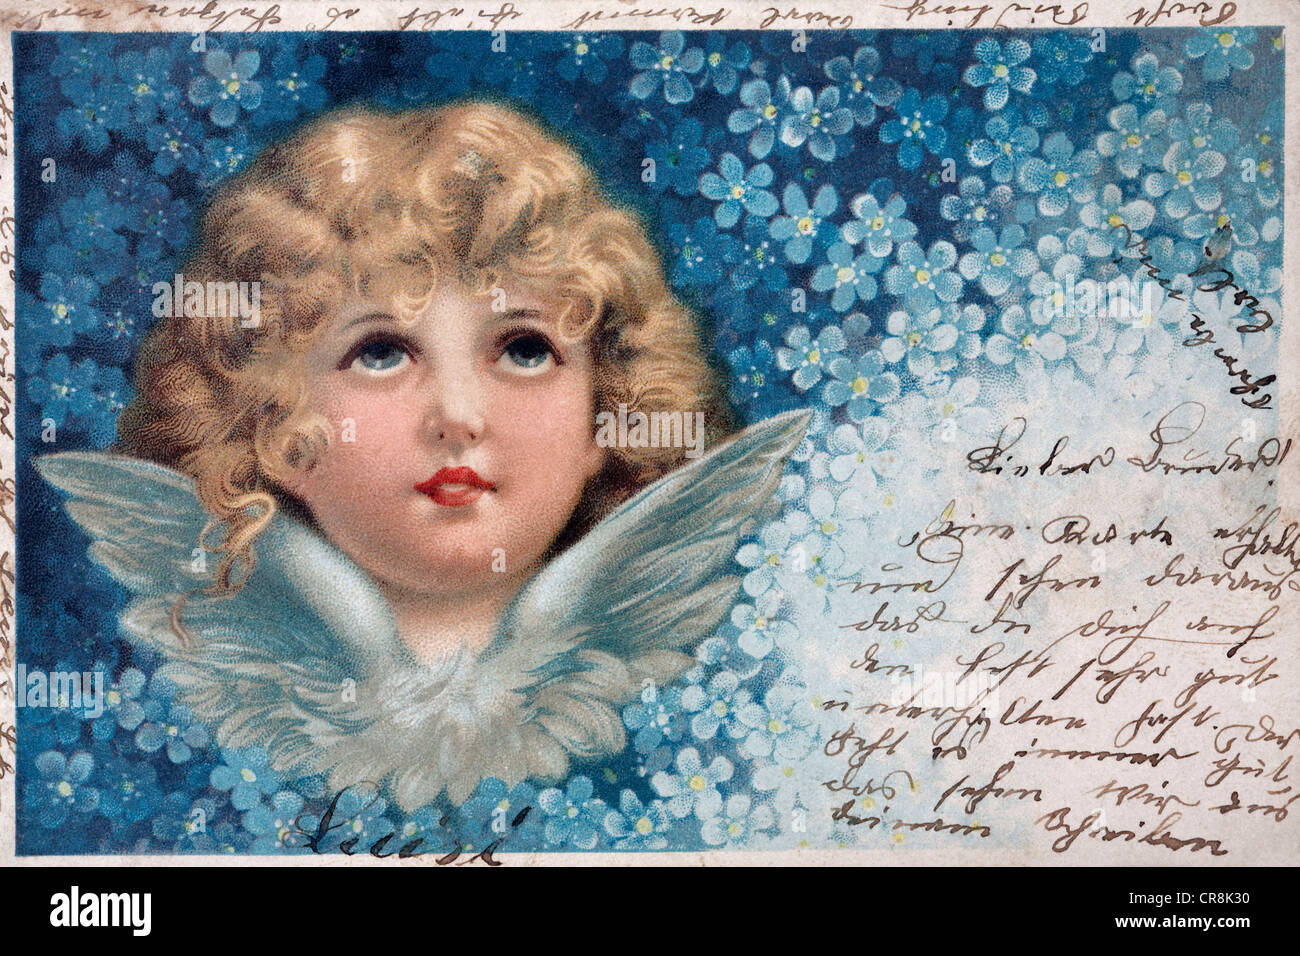 Historic Christmas card with angel, around 1900, writing in Suetterlin script, kitsch Stock Photo